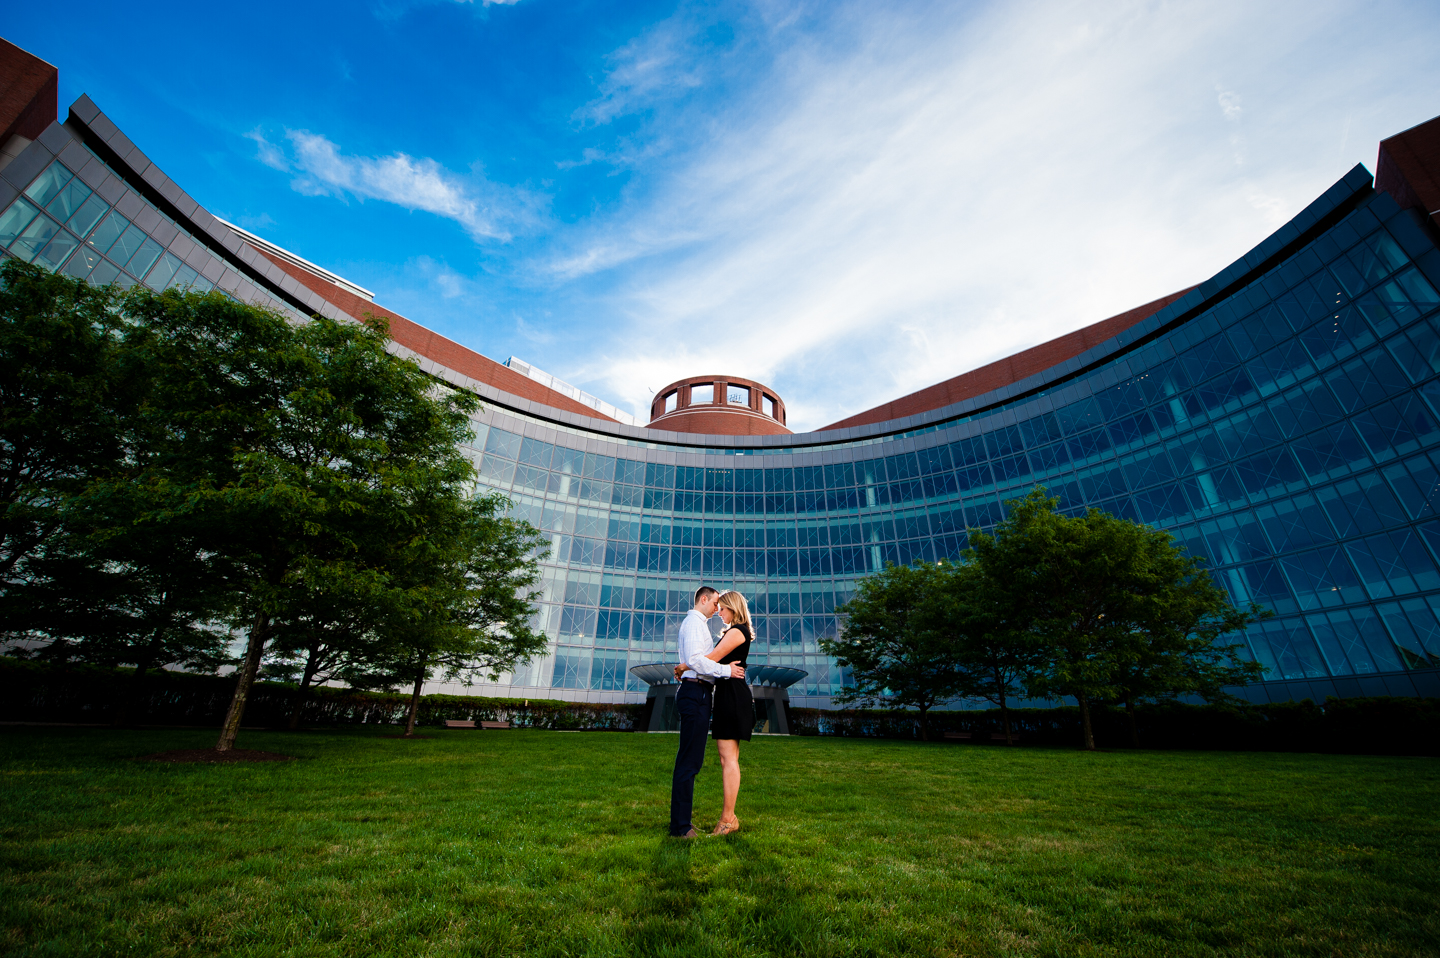 Couple embraces in front of gorgeous glass front building during their sunset engagement session